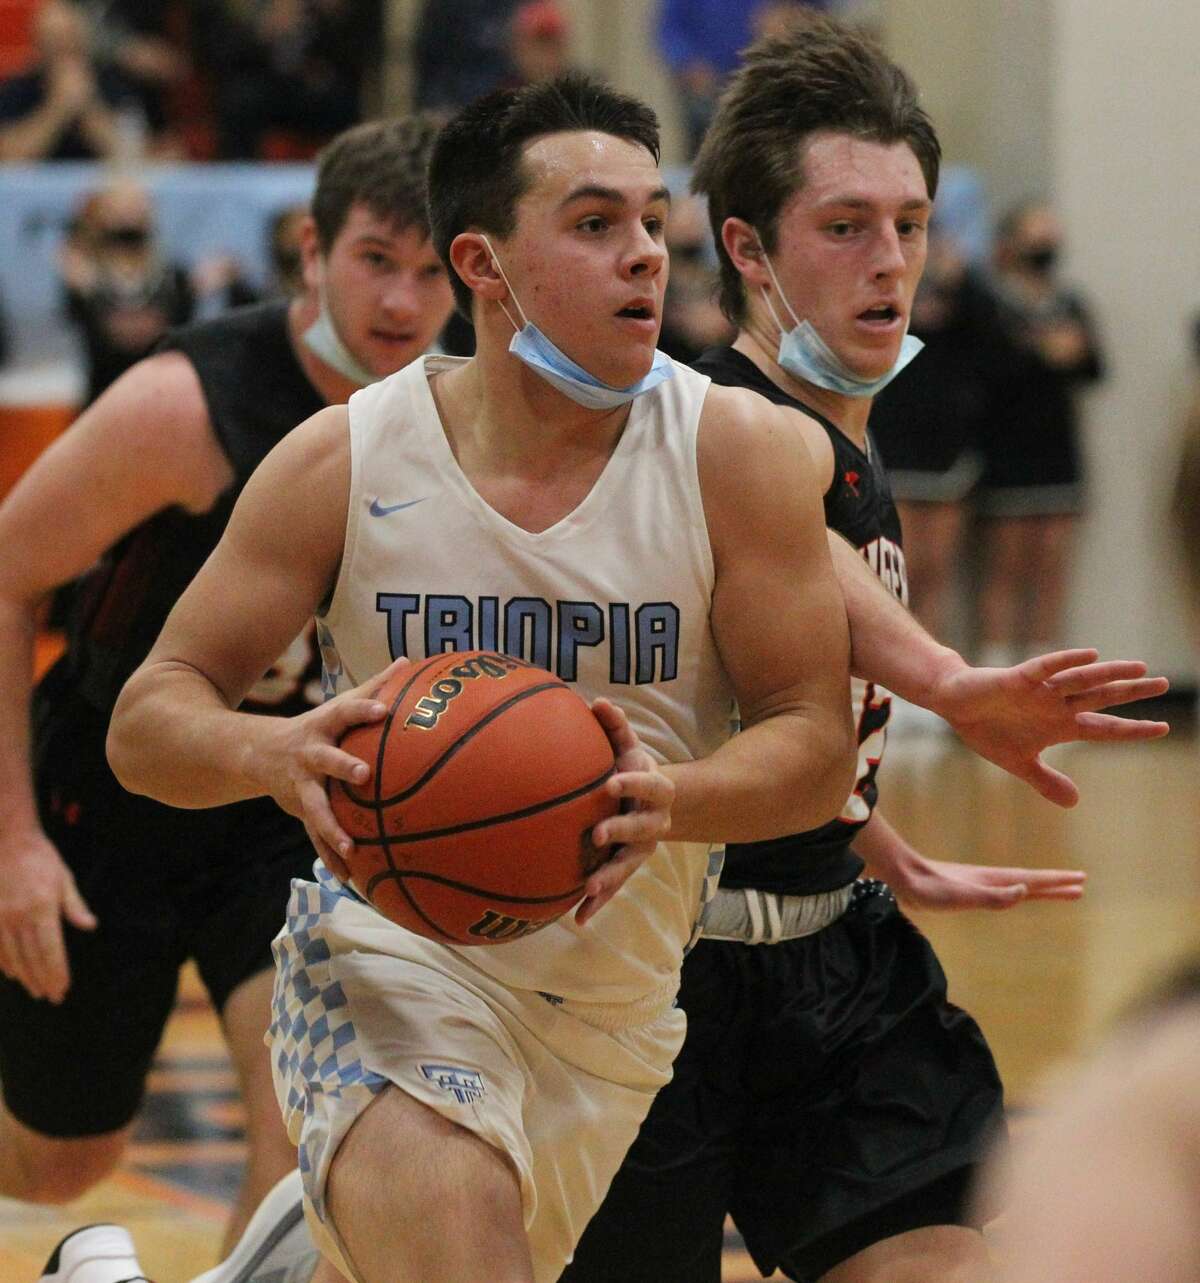 Action from the Triopia boys' basketball team's win over Greenfield-Northwestern in the quarterfinals of the Waverly Holiday Tournament on Tuesday